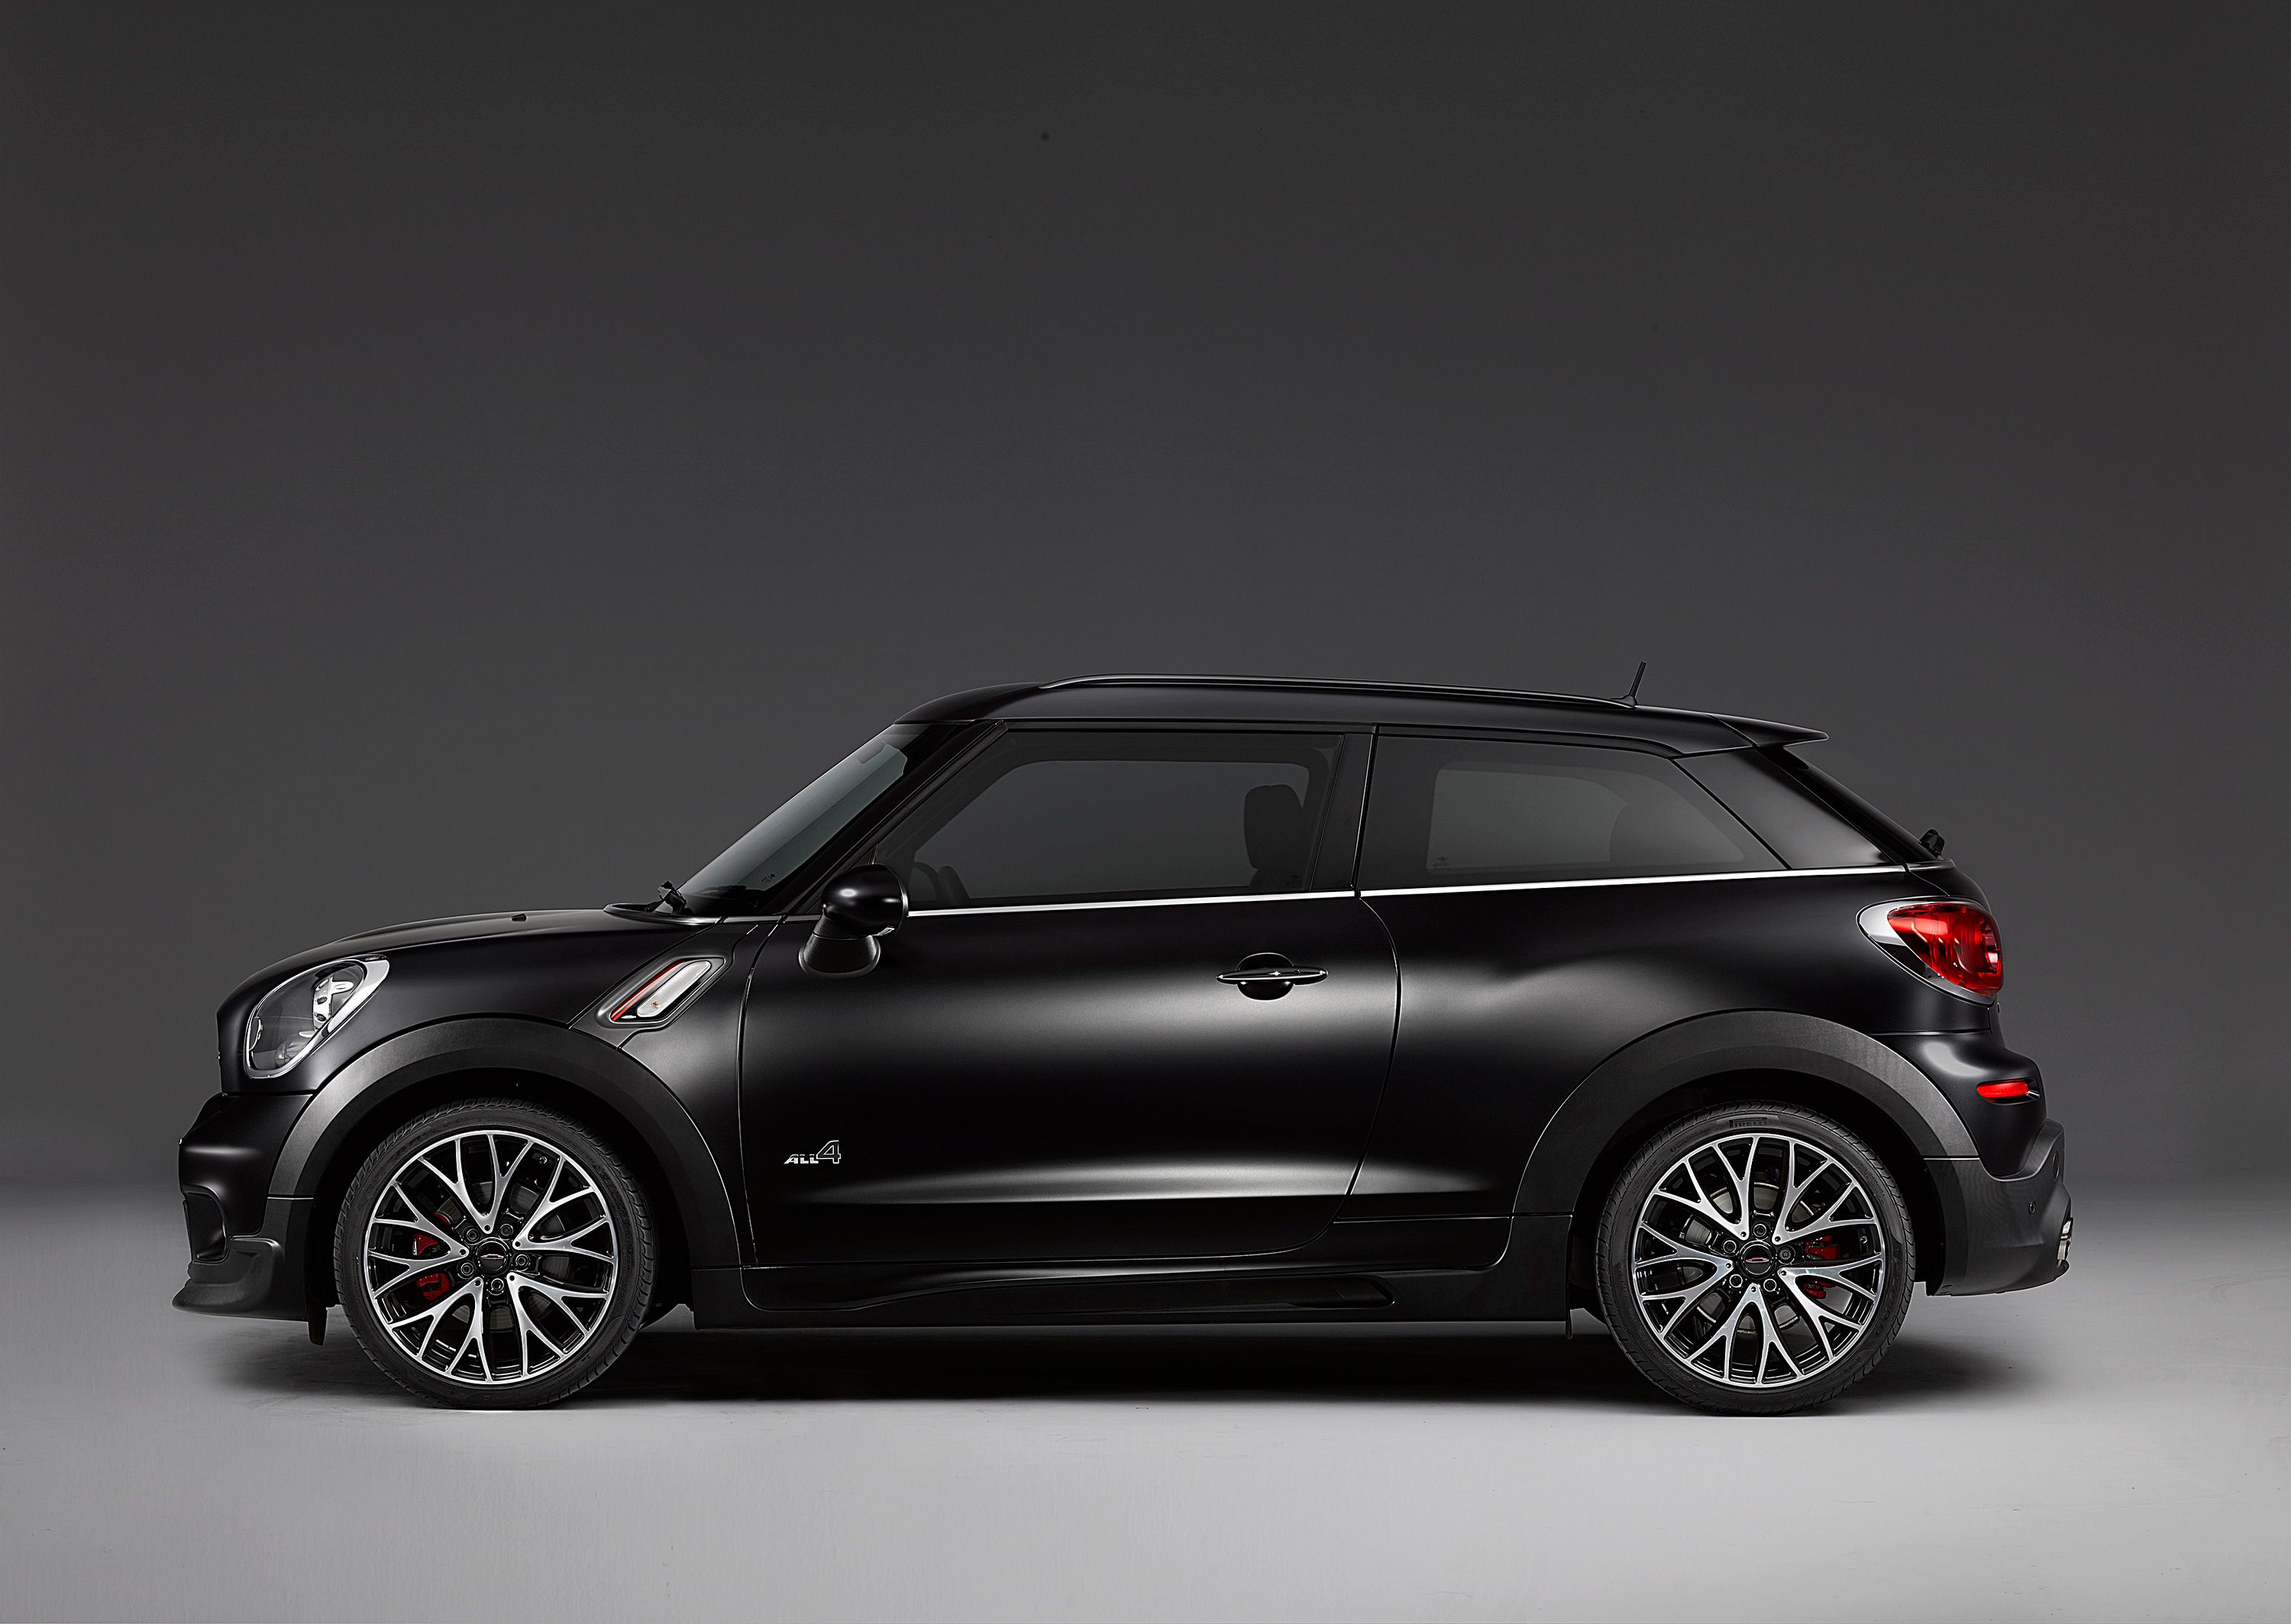 2014 Mini Countryman and Paceman Frozen Black Limited Edition 